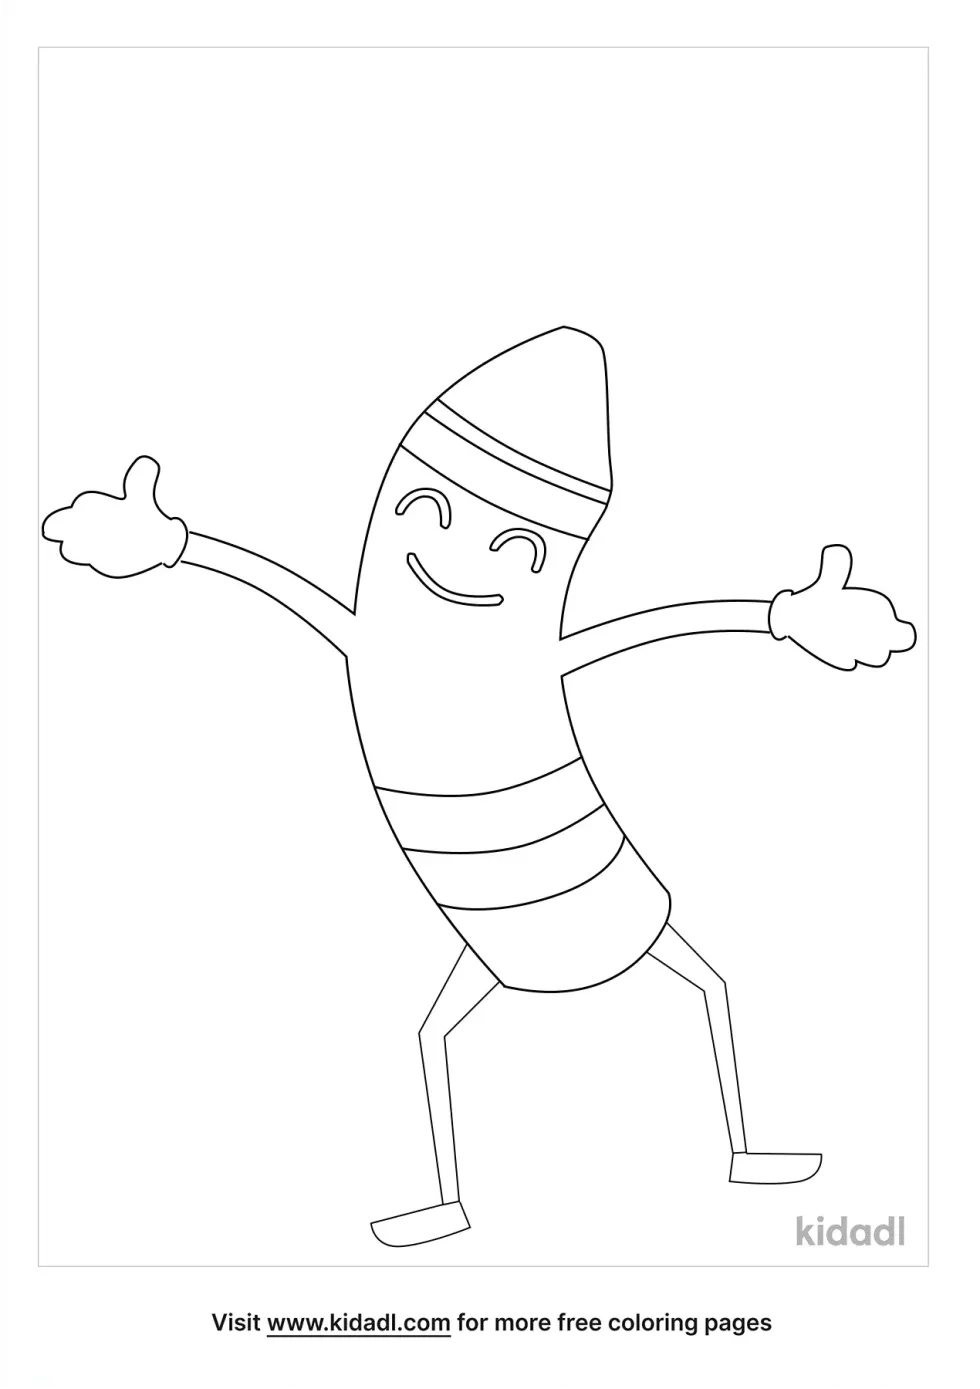 Crayon With Arms And Legs